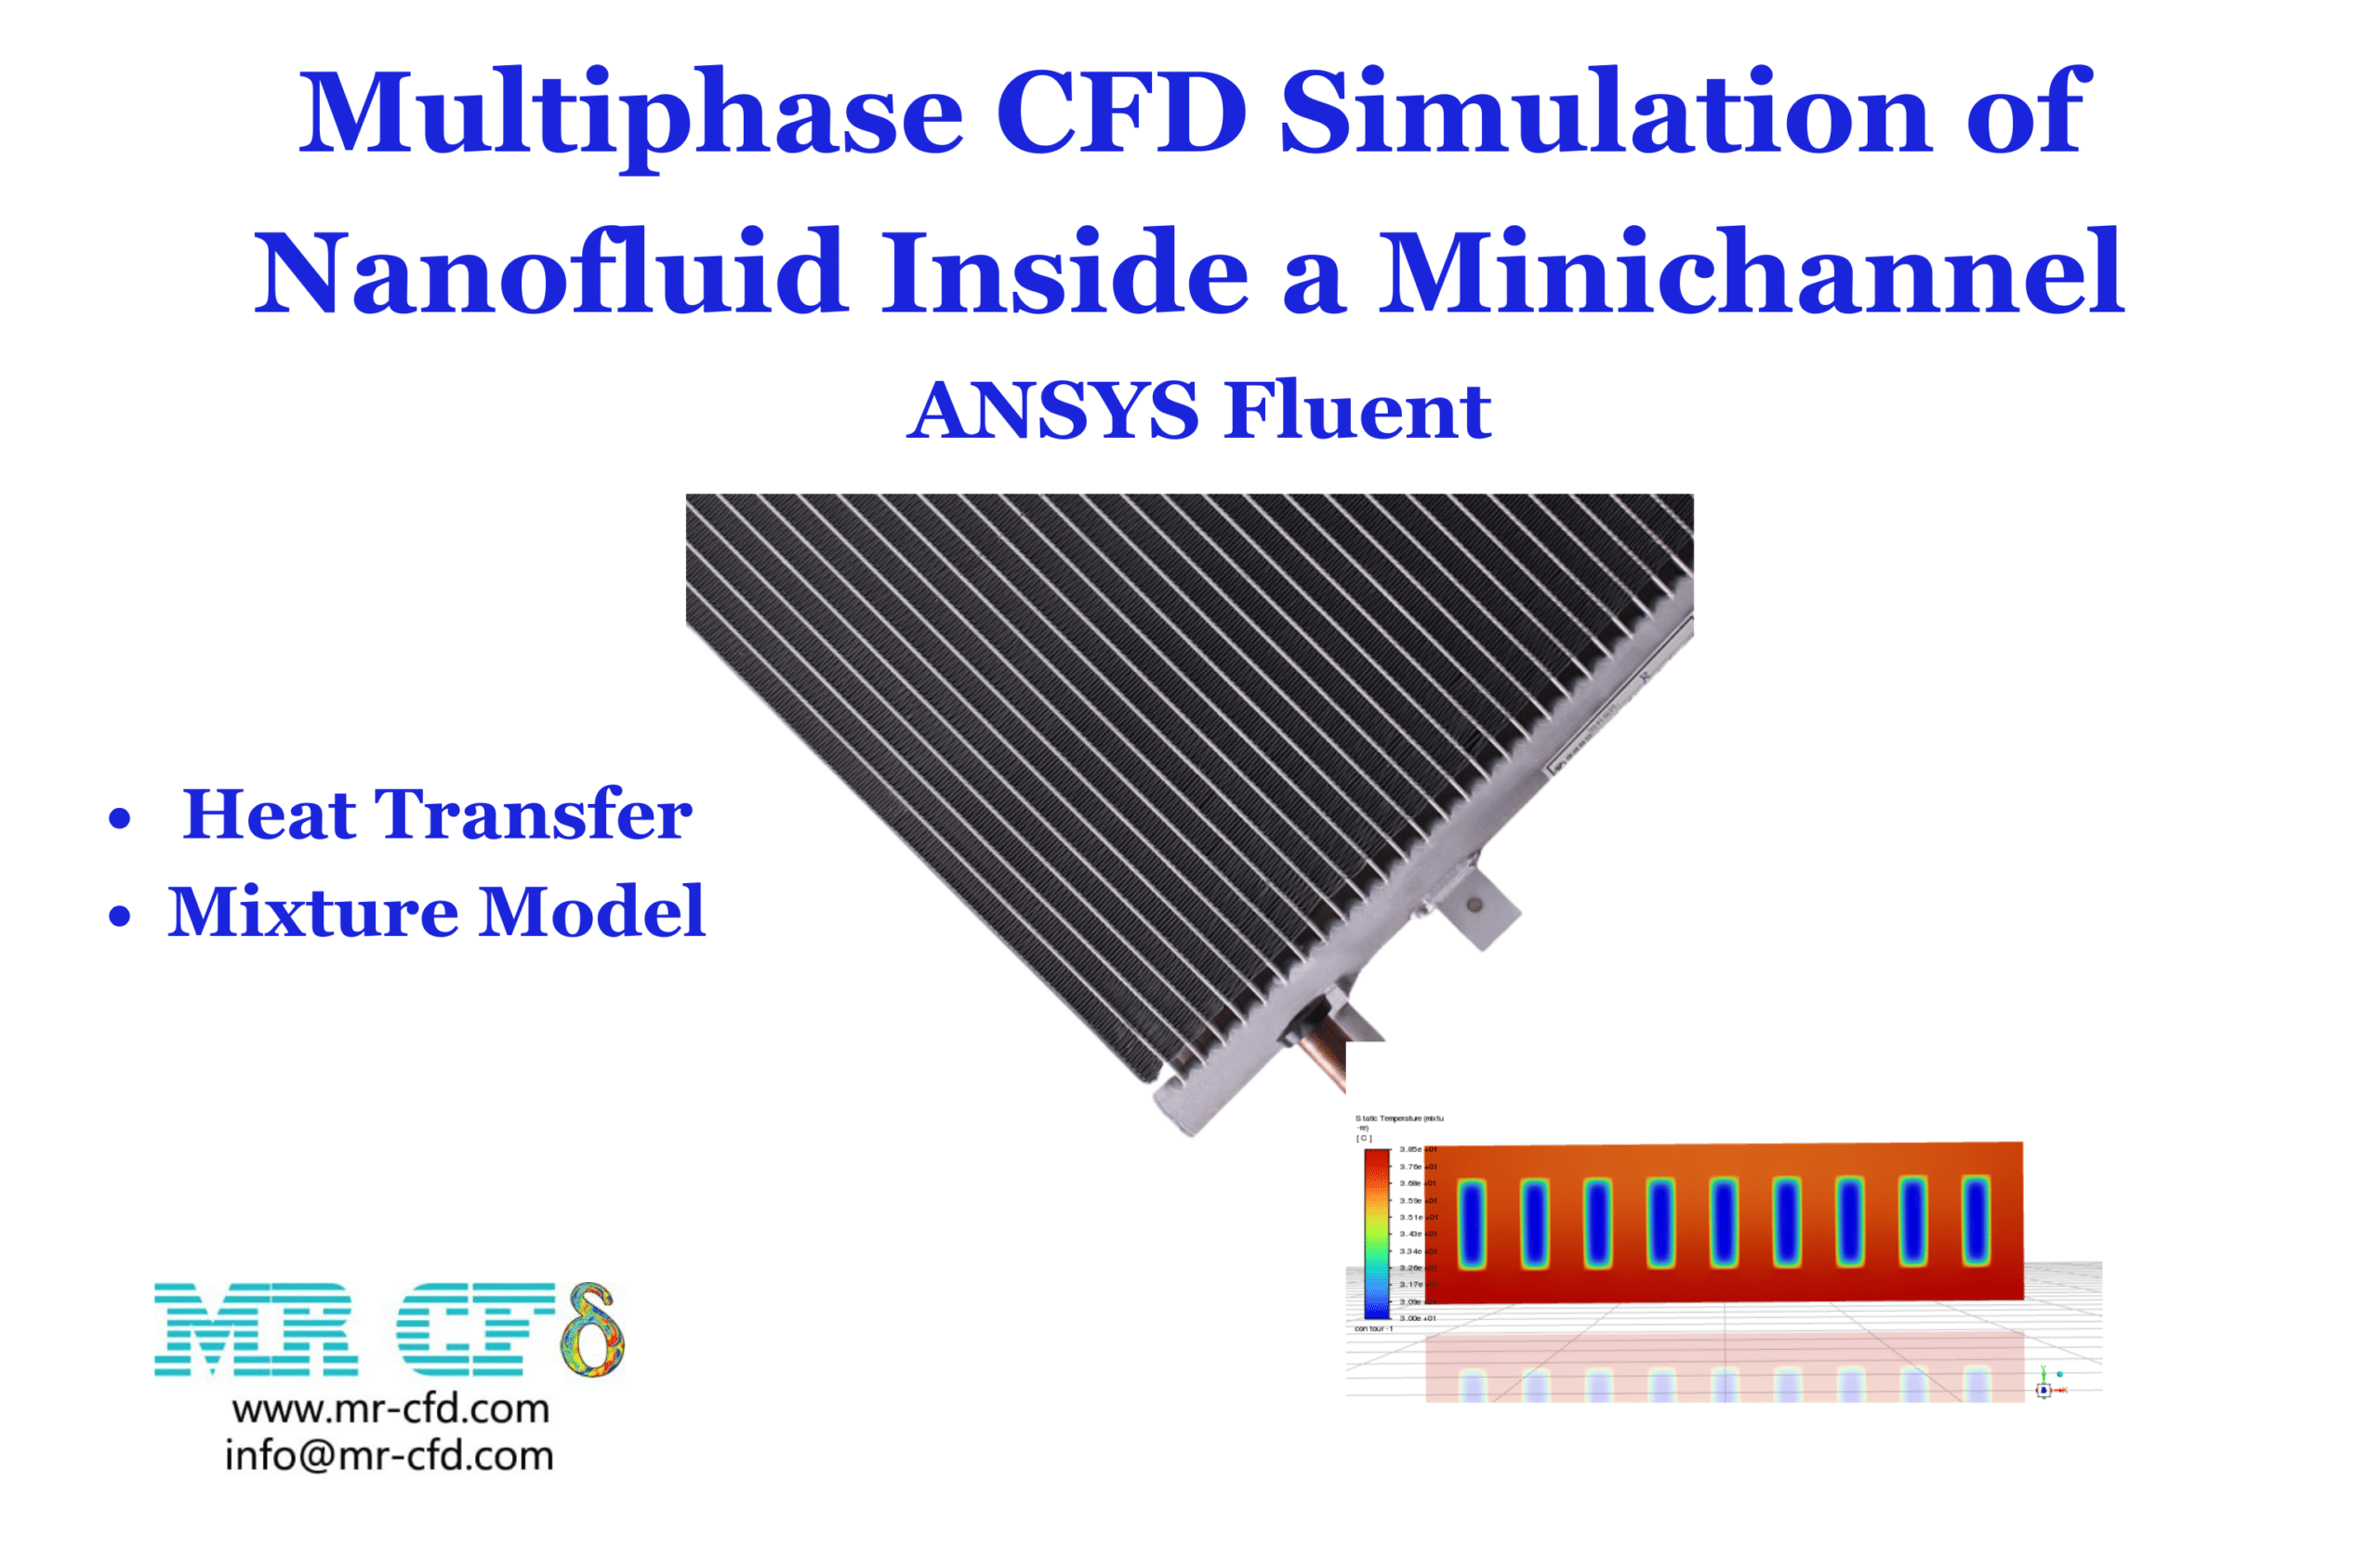 Multiphase CFD Simulation of Nanofluid inside a Minichannel, ANSYS Fluent